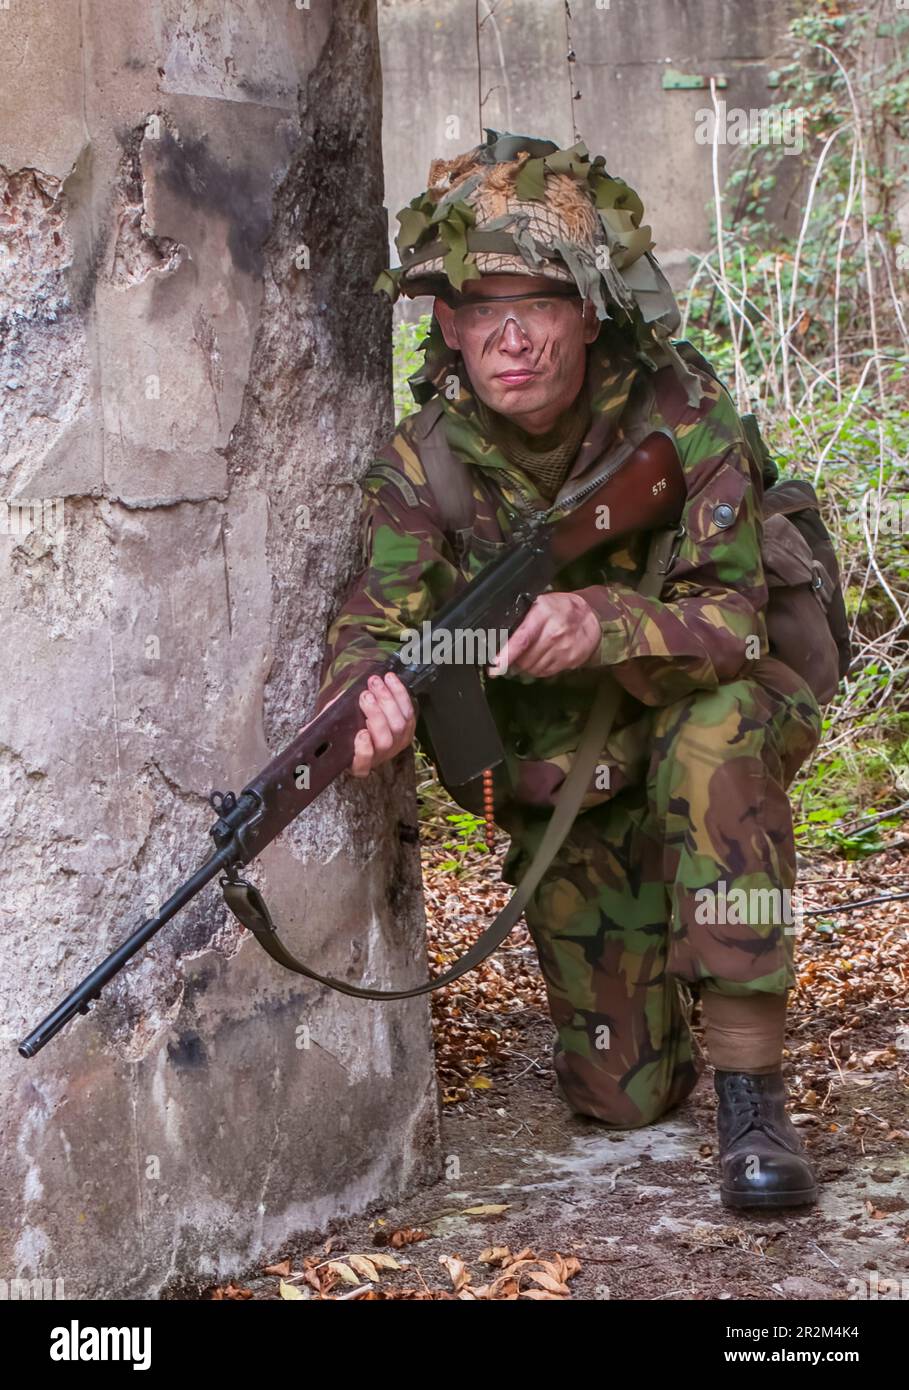 1970 British Army soldier in camouflage suit and steel helmet carrying ...